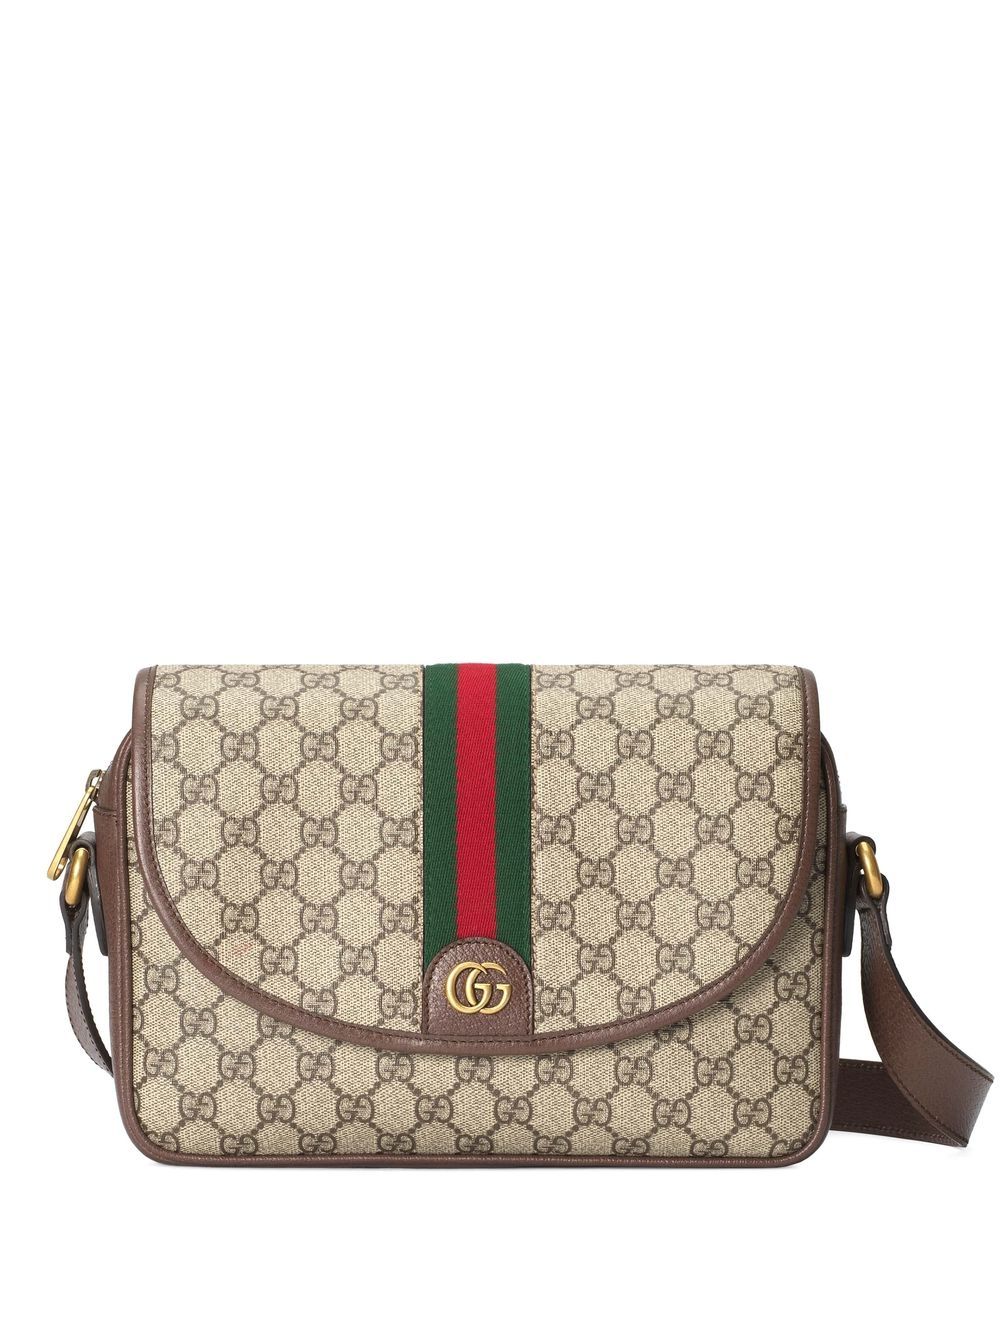 Gucci Ophidia Gg Printed Messenger Bag In Beige,brown